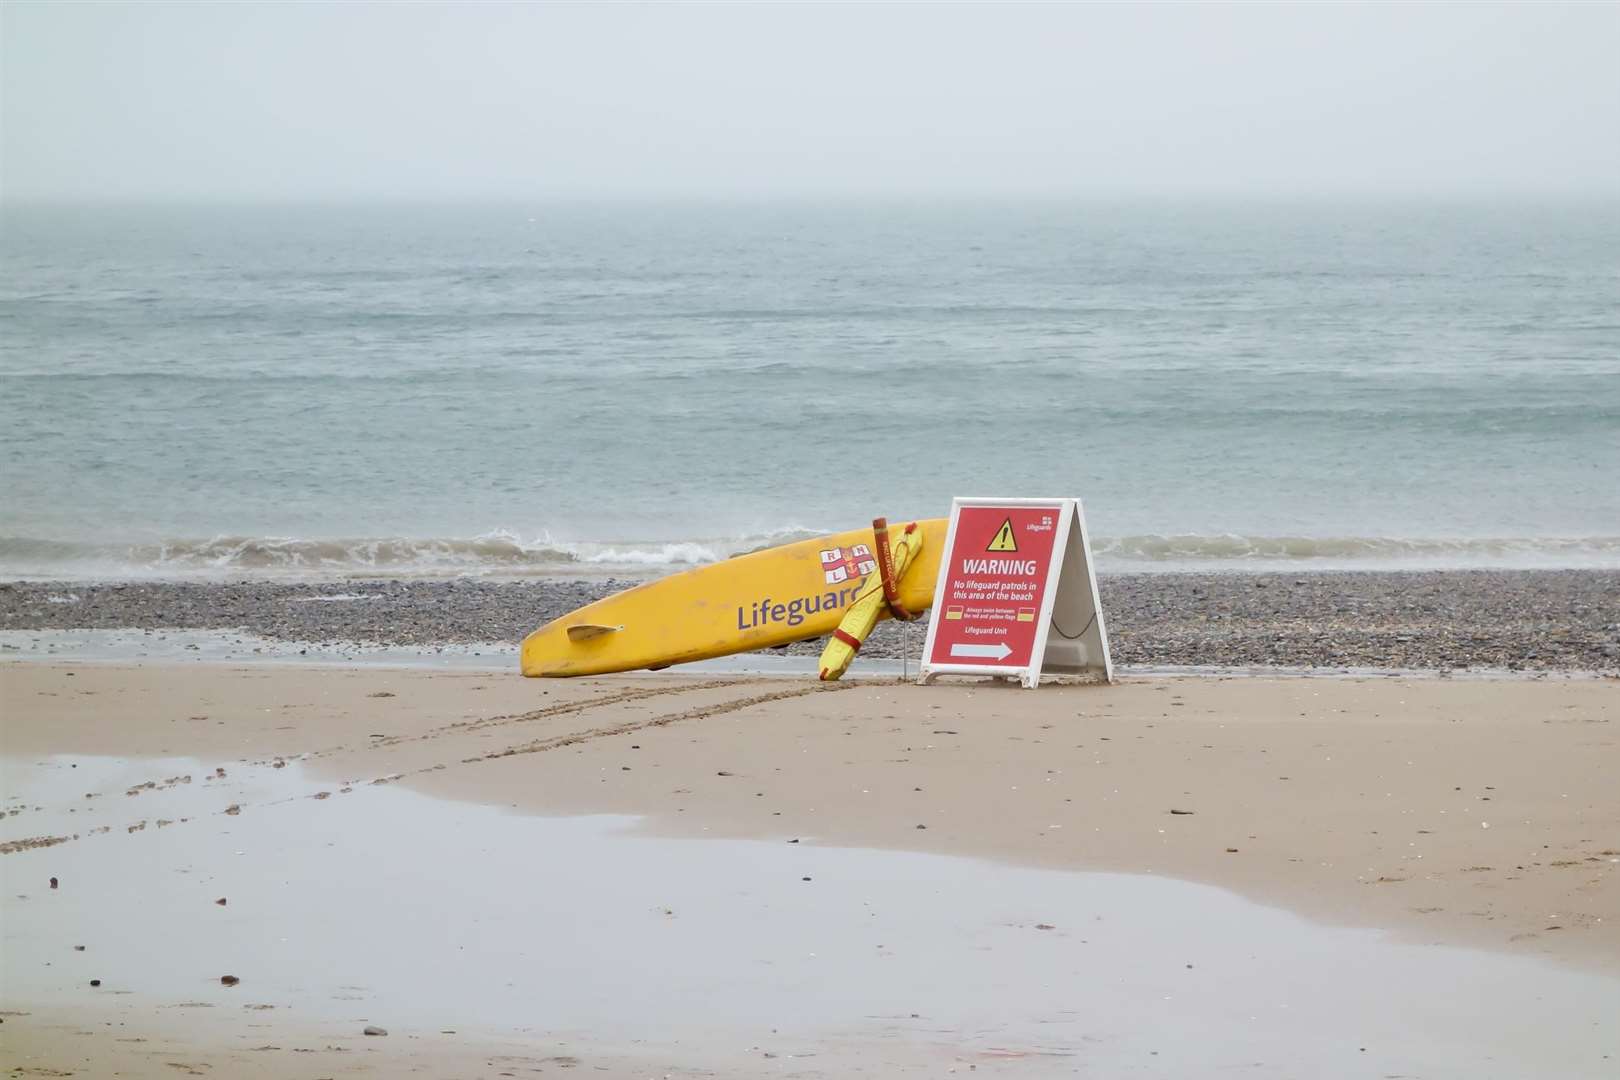 Take the advice of coastguards or messages displayed before entering the water. Image: iStock